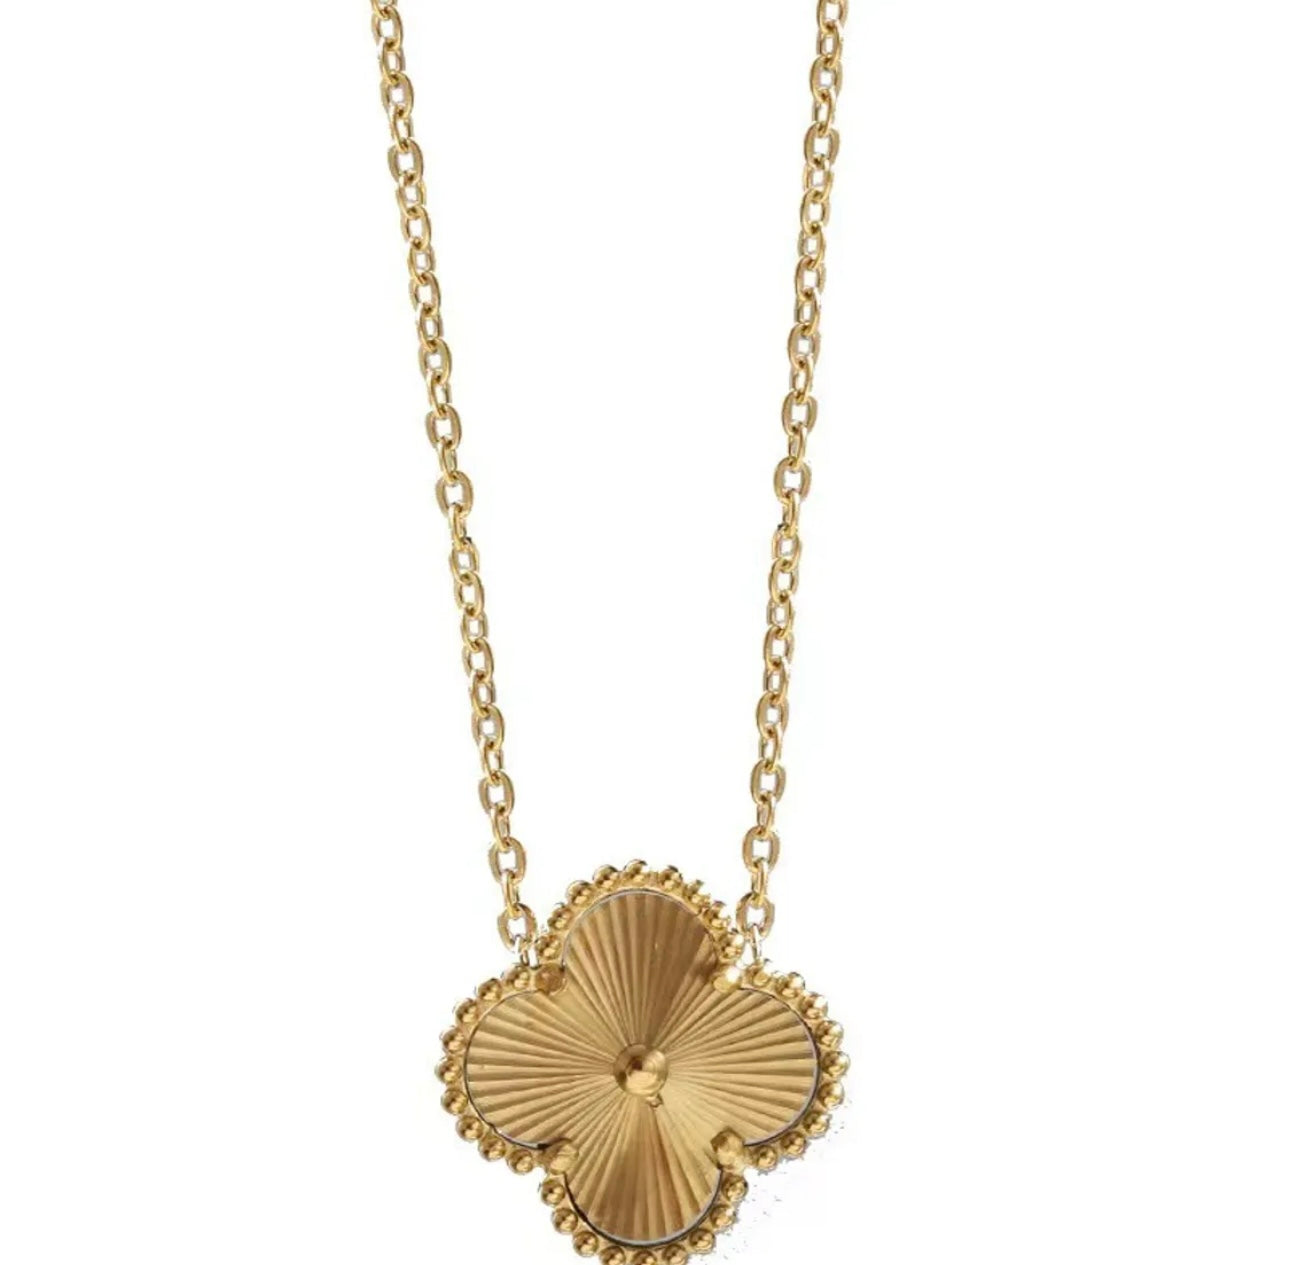 Trendy gold clover necklace